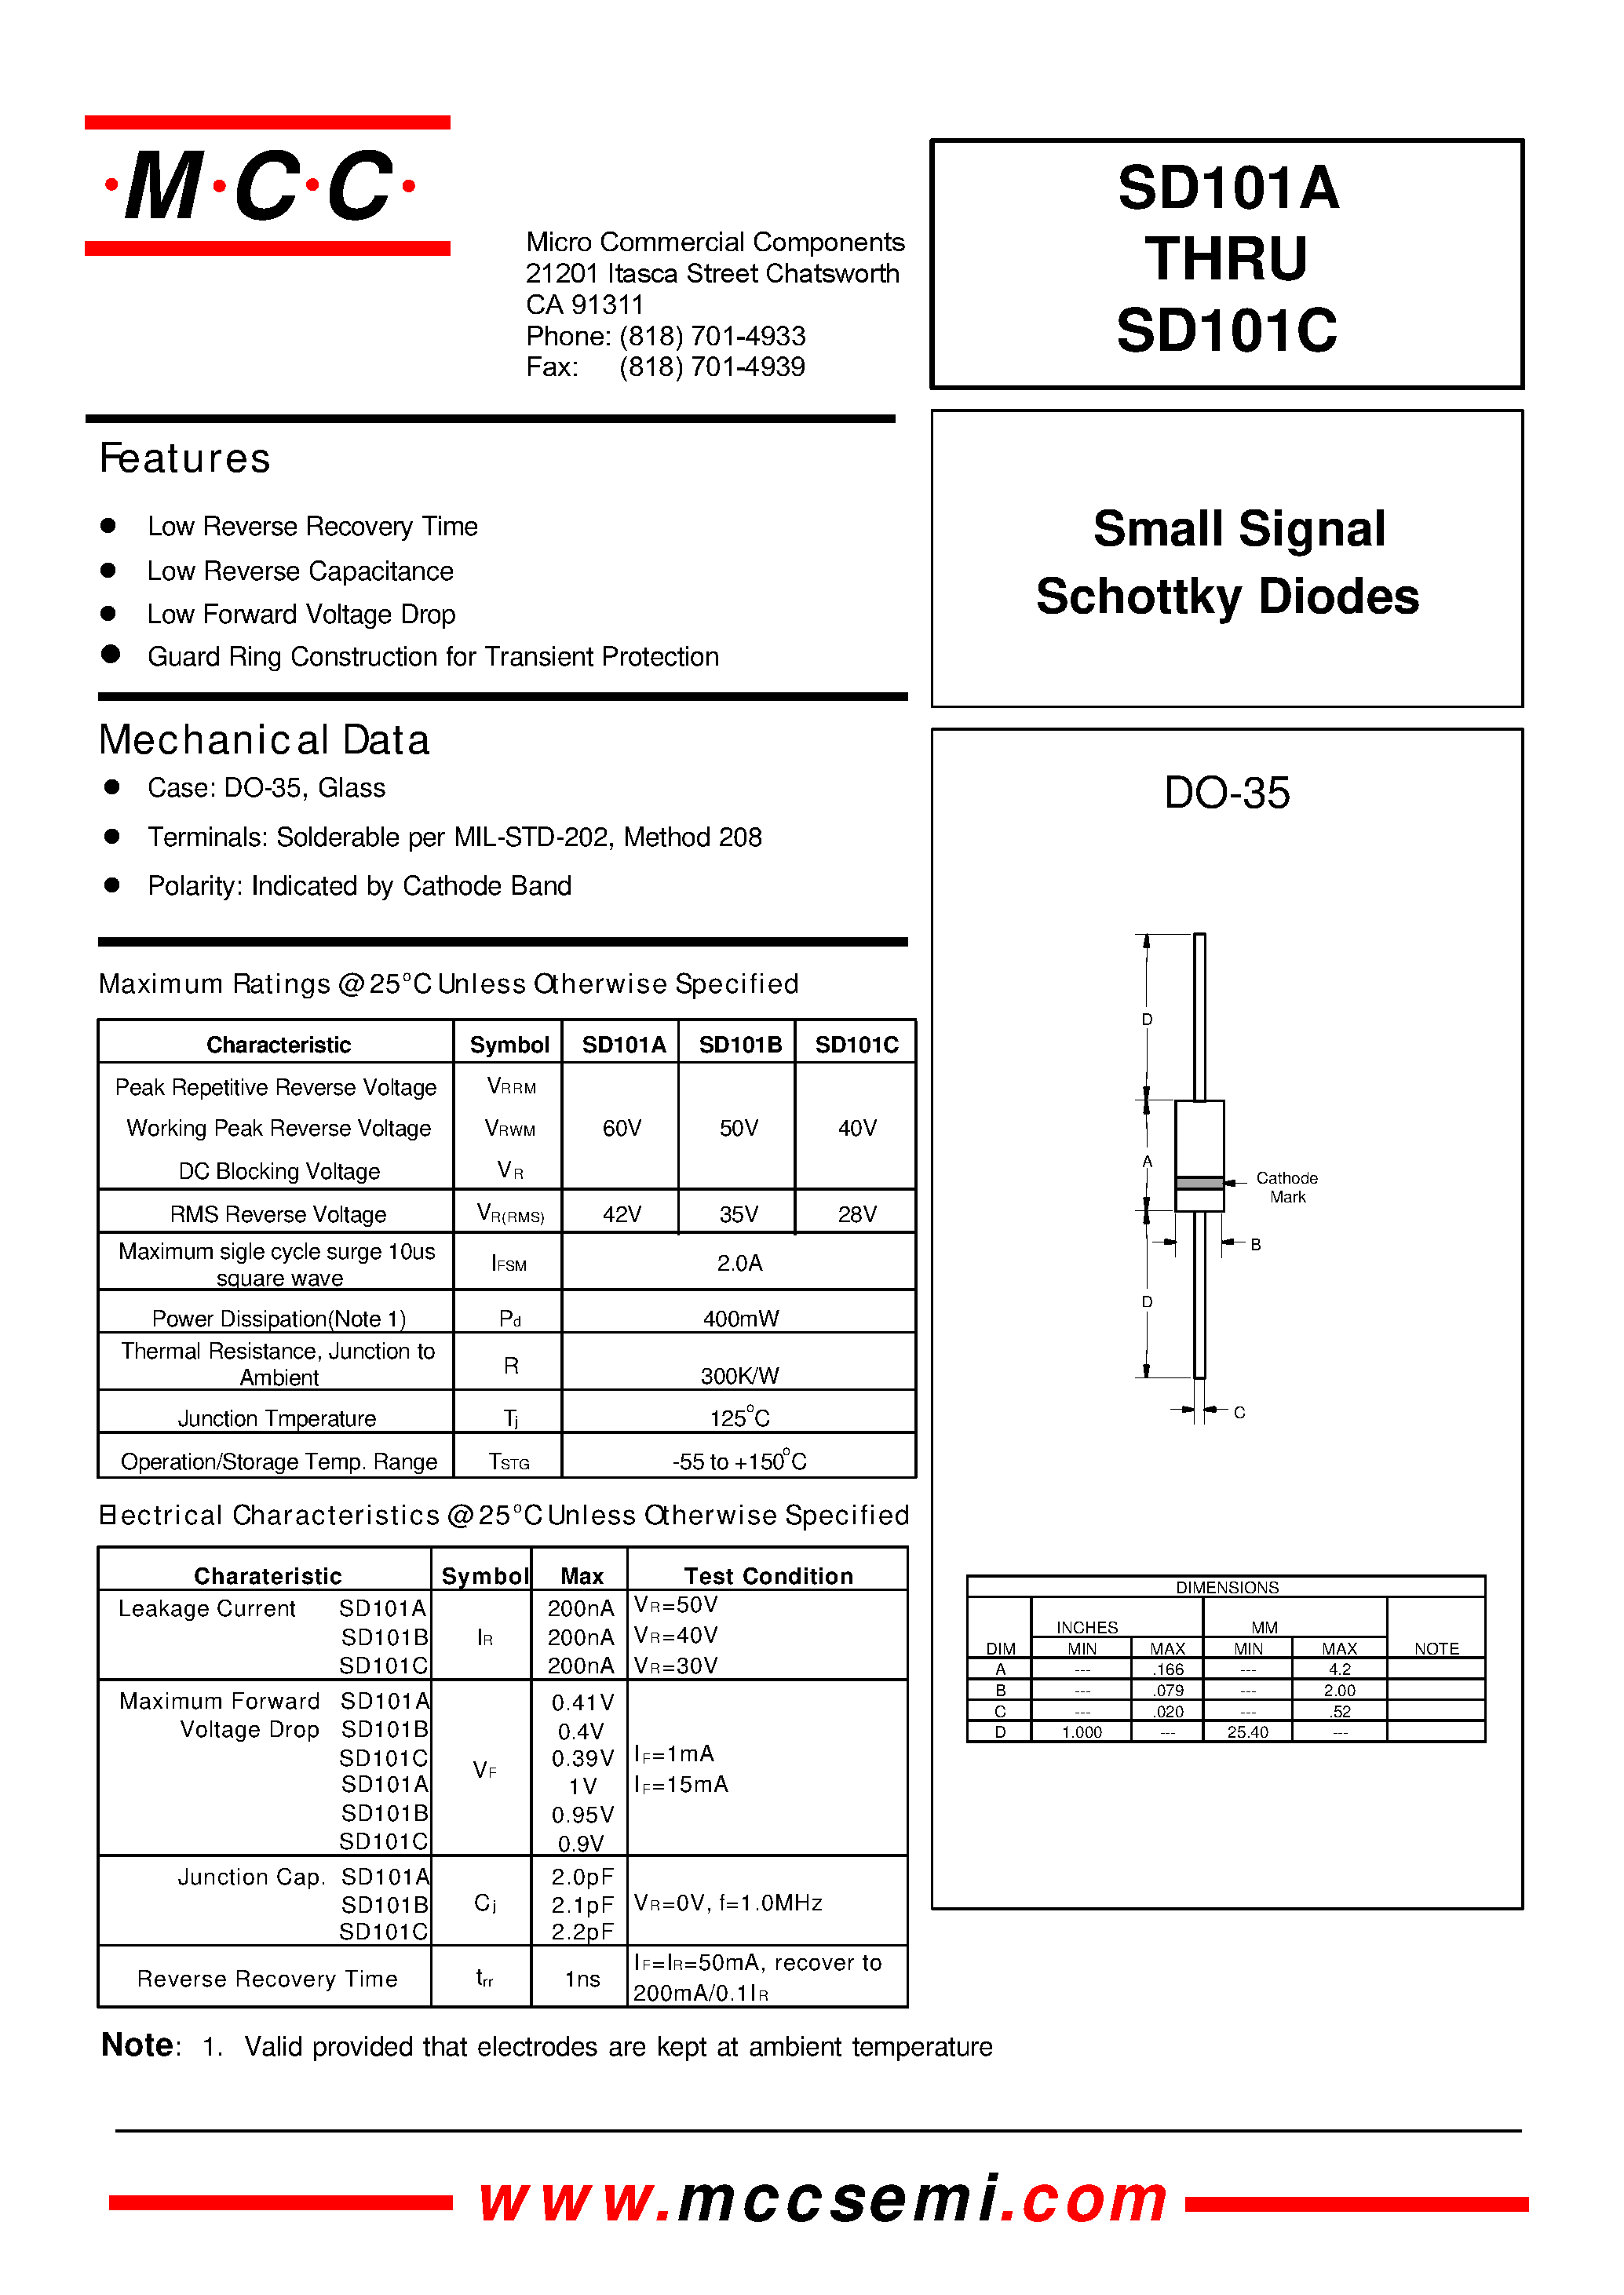 Datasheet SD101A - (SD101A - SD101C) Small Signal Schottky Diodes page 1